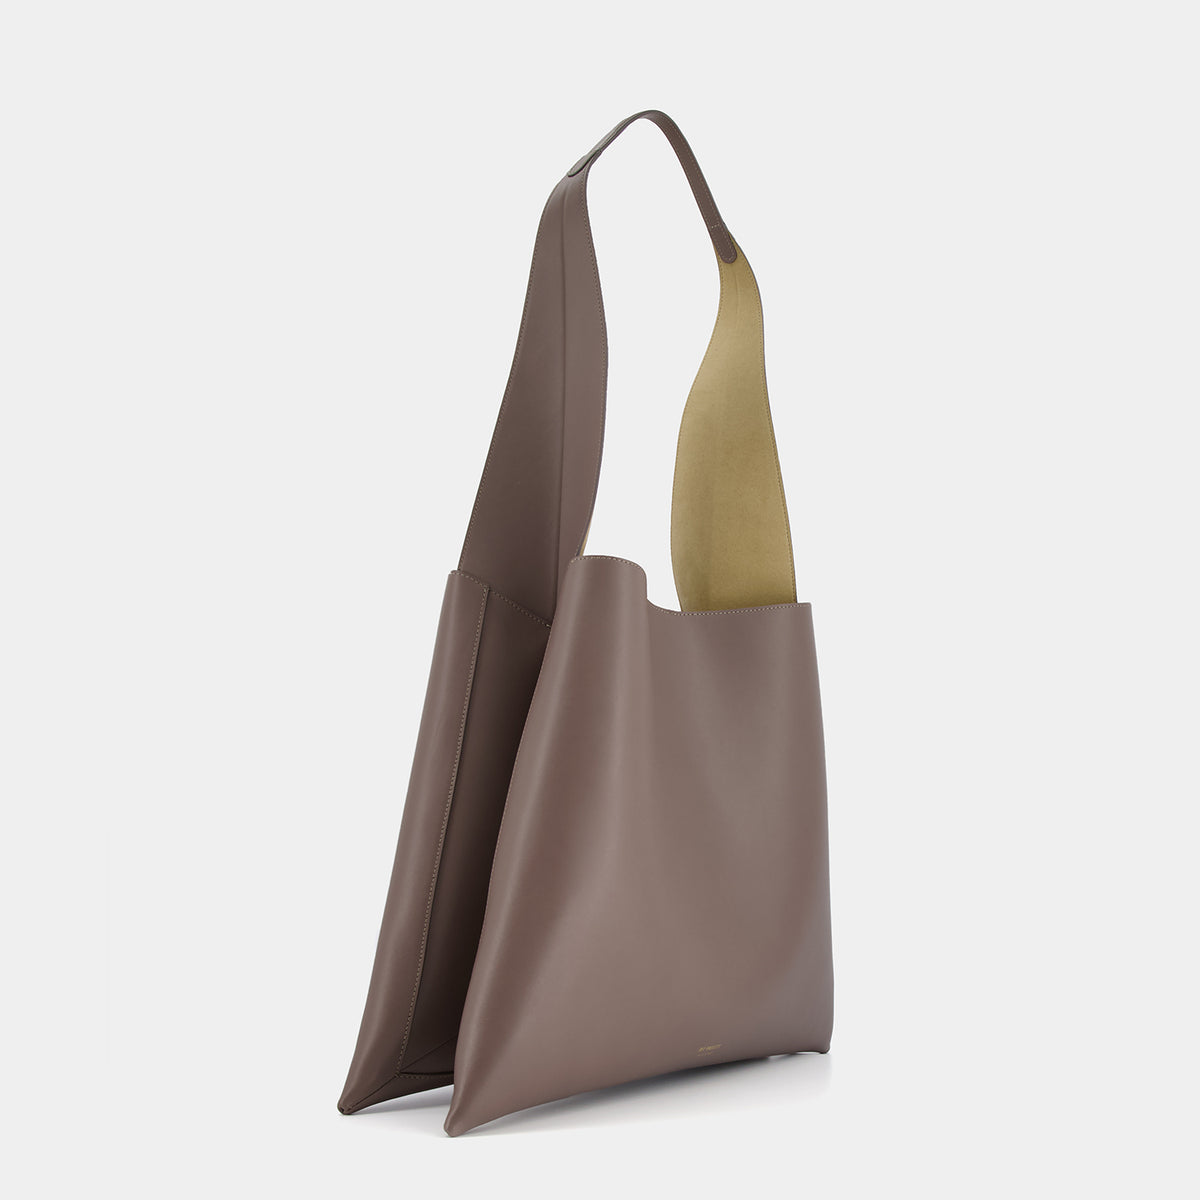 Leather Shopper bag - tote bag for ladies in black or brown. Soft